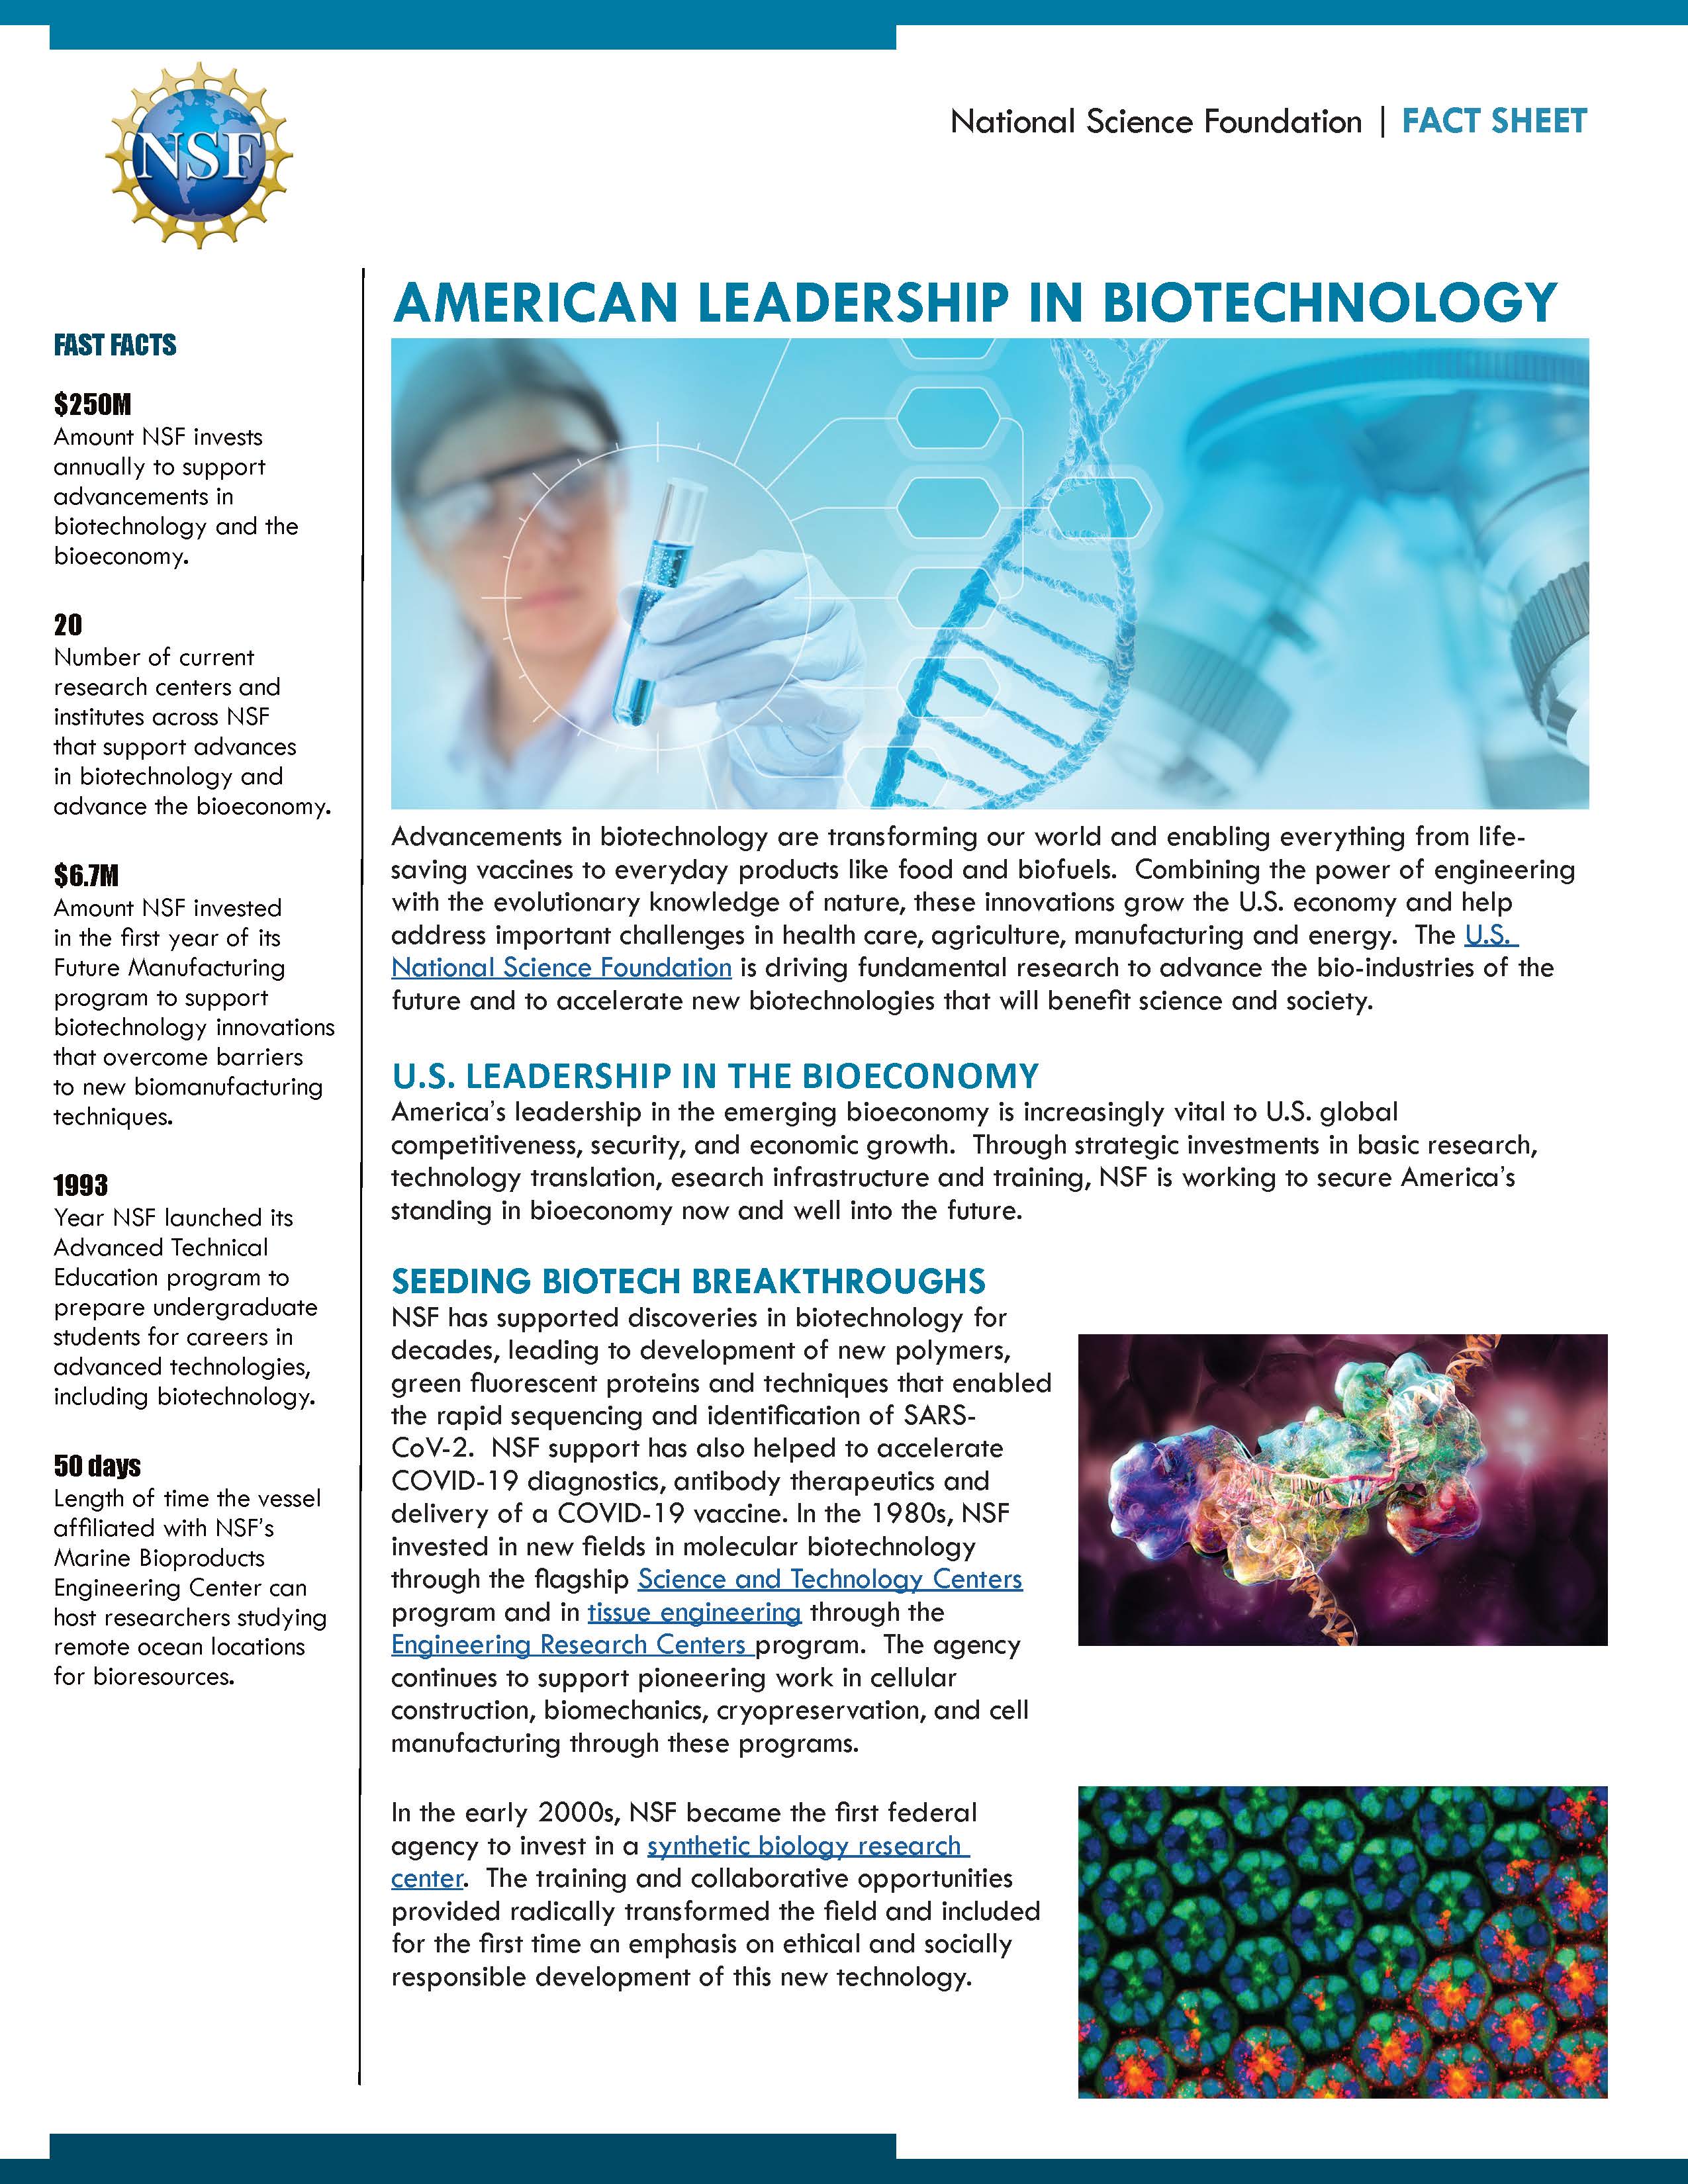 American Leadership in Biotechnology cover page